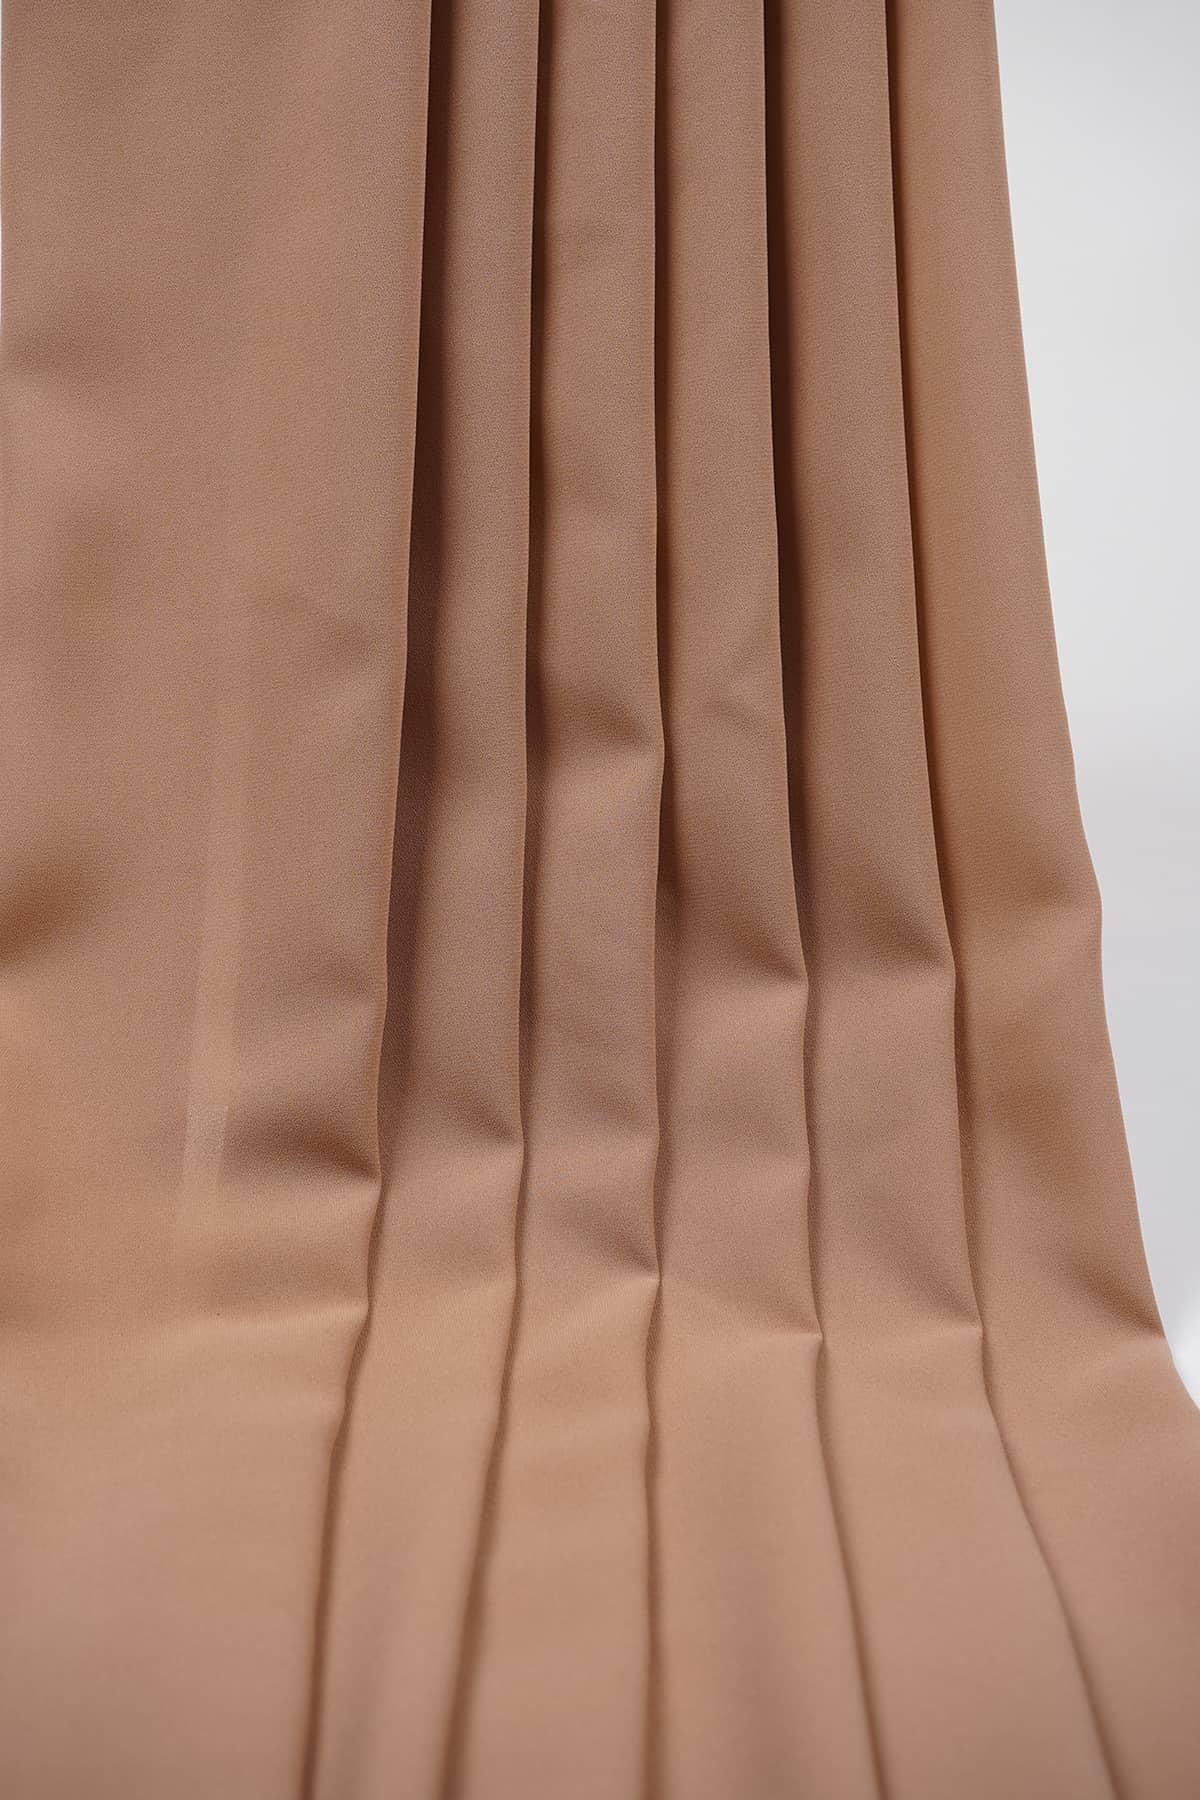 Plain Dyed Sash - saraaha.com - Casual, Casual Wear, Color Variety, Comfy Casual, comfy casuals, Formal Wear, Heavy Weight, Indo Western, Kurta, Long Dresses, Men Wear, Men's wear collection, One Pieces, Plain Dyed, Polyester, Shirt, Suits, Western Dresses, Women Wear